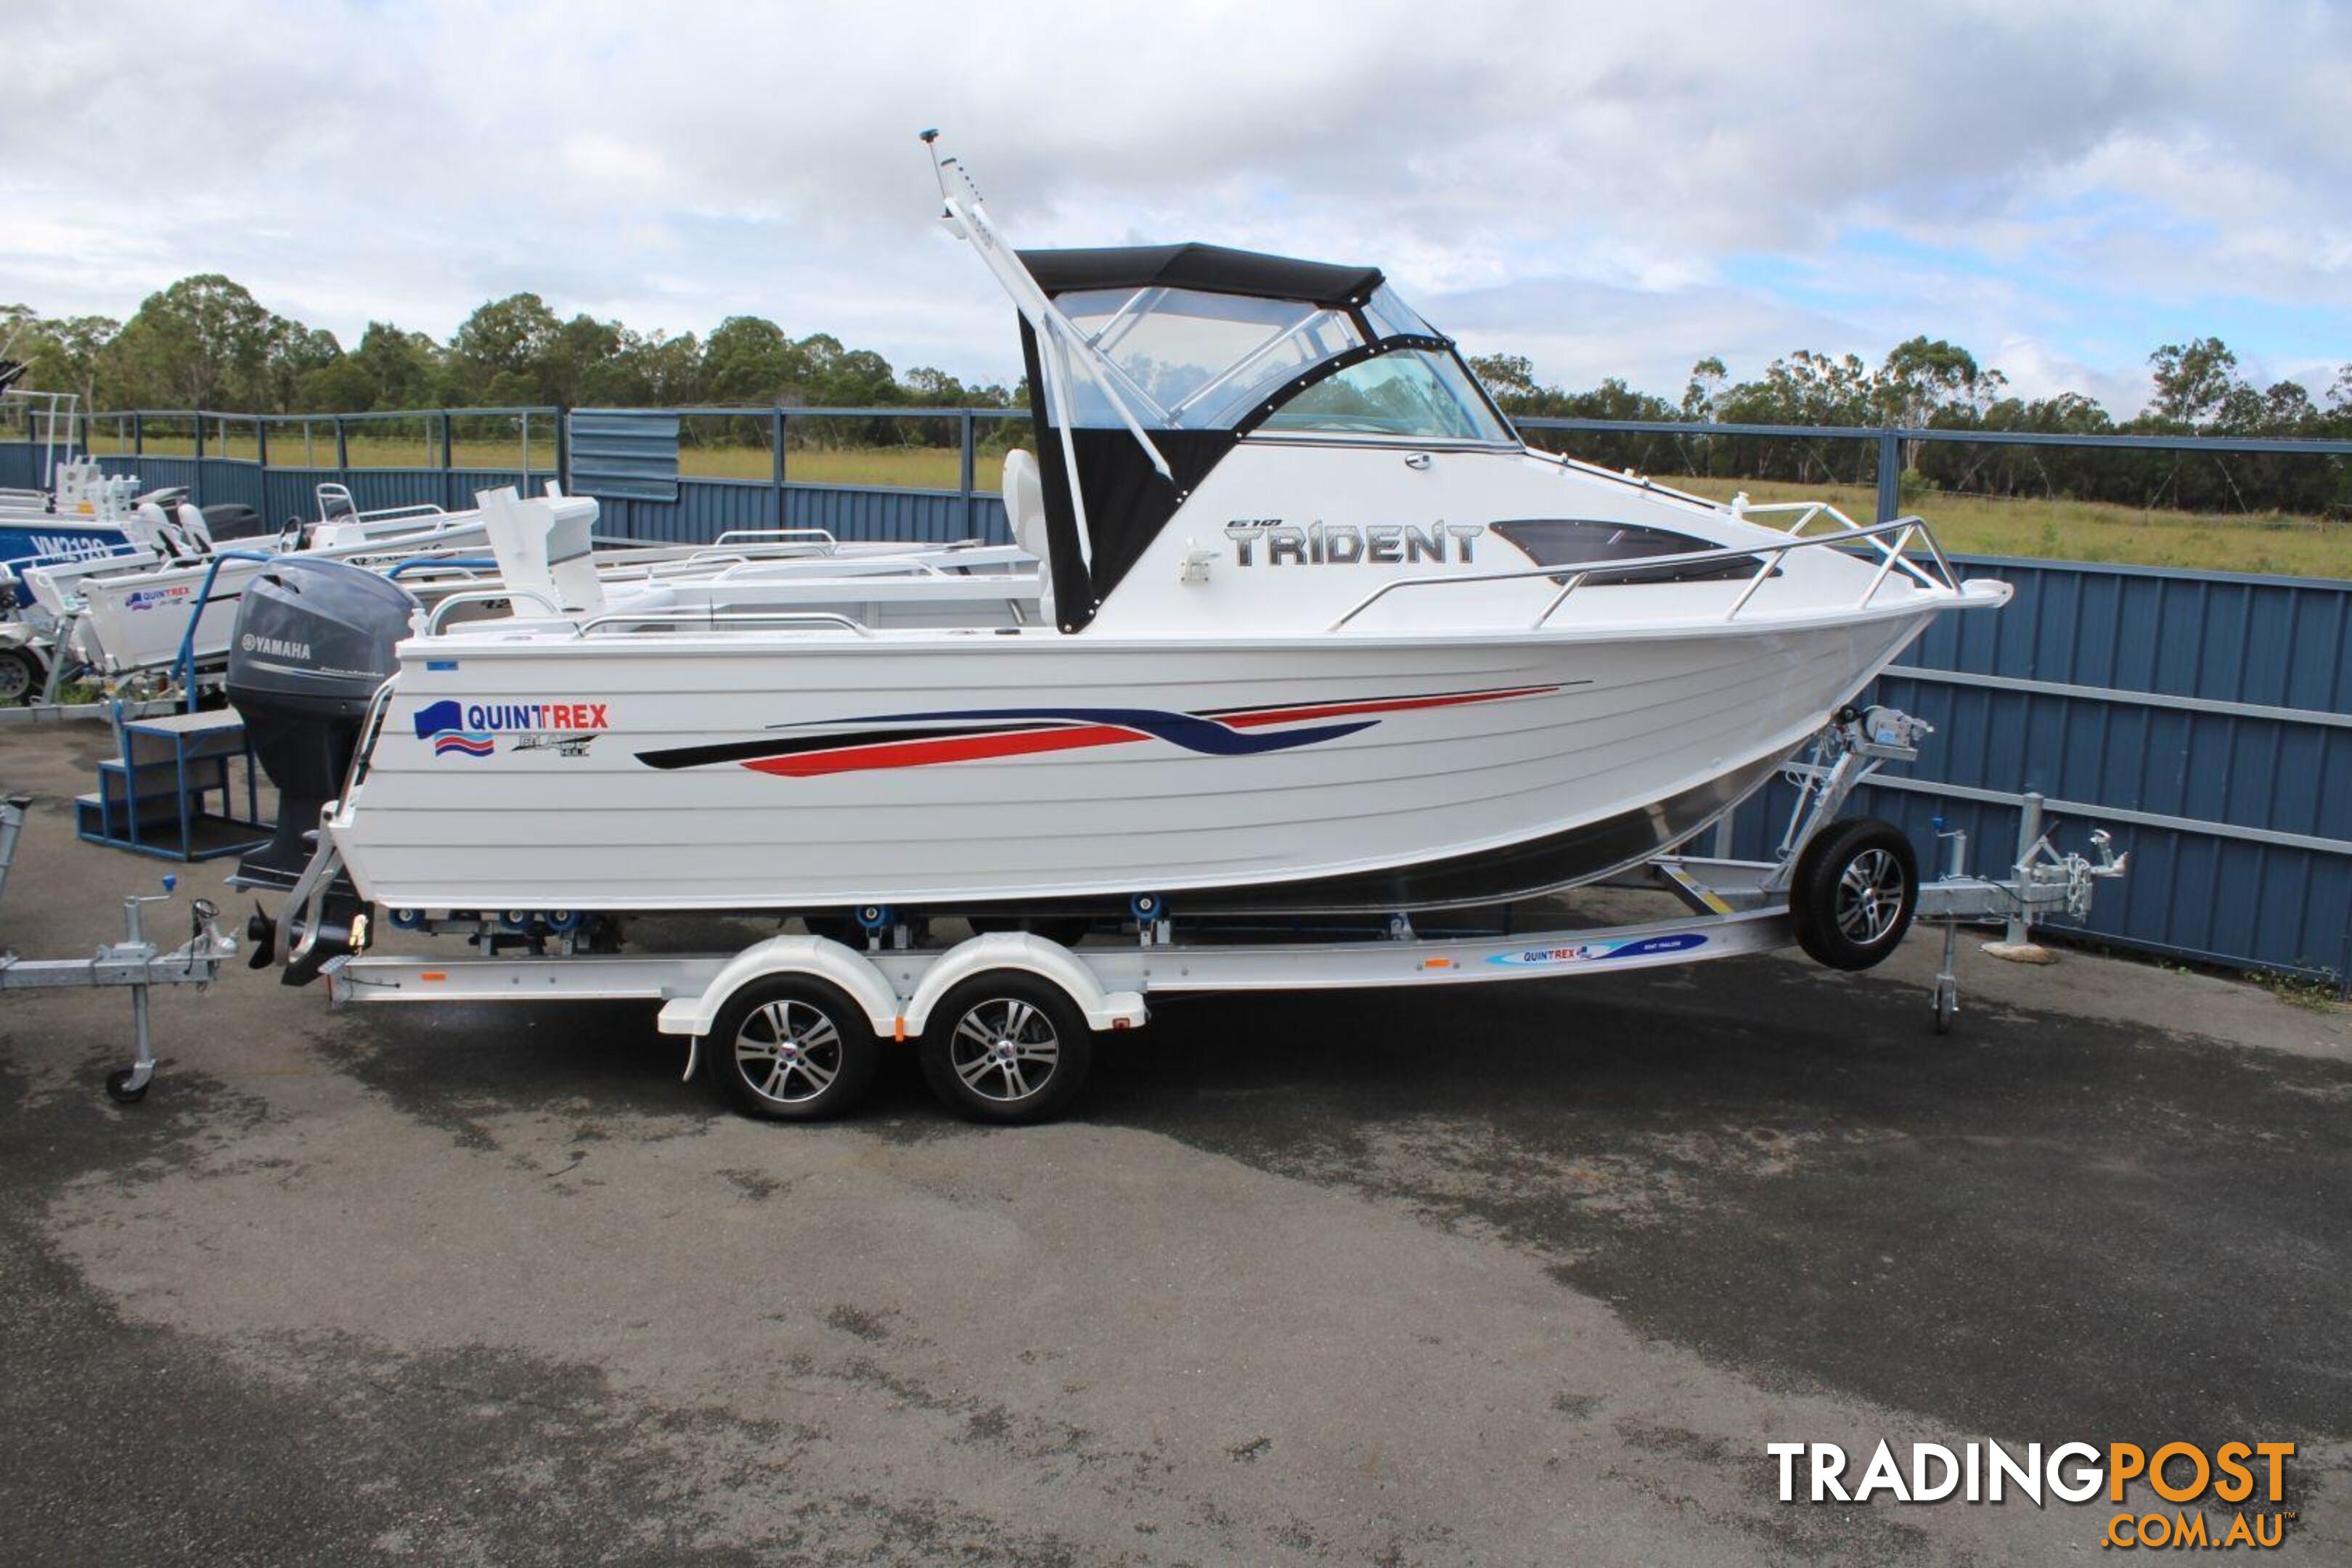 Quintrex 610 Trident + Yamaha F130hp 4-Stroke - Pack 2 for sale online prices